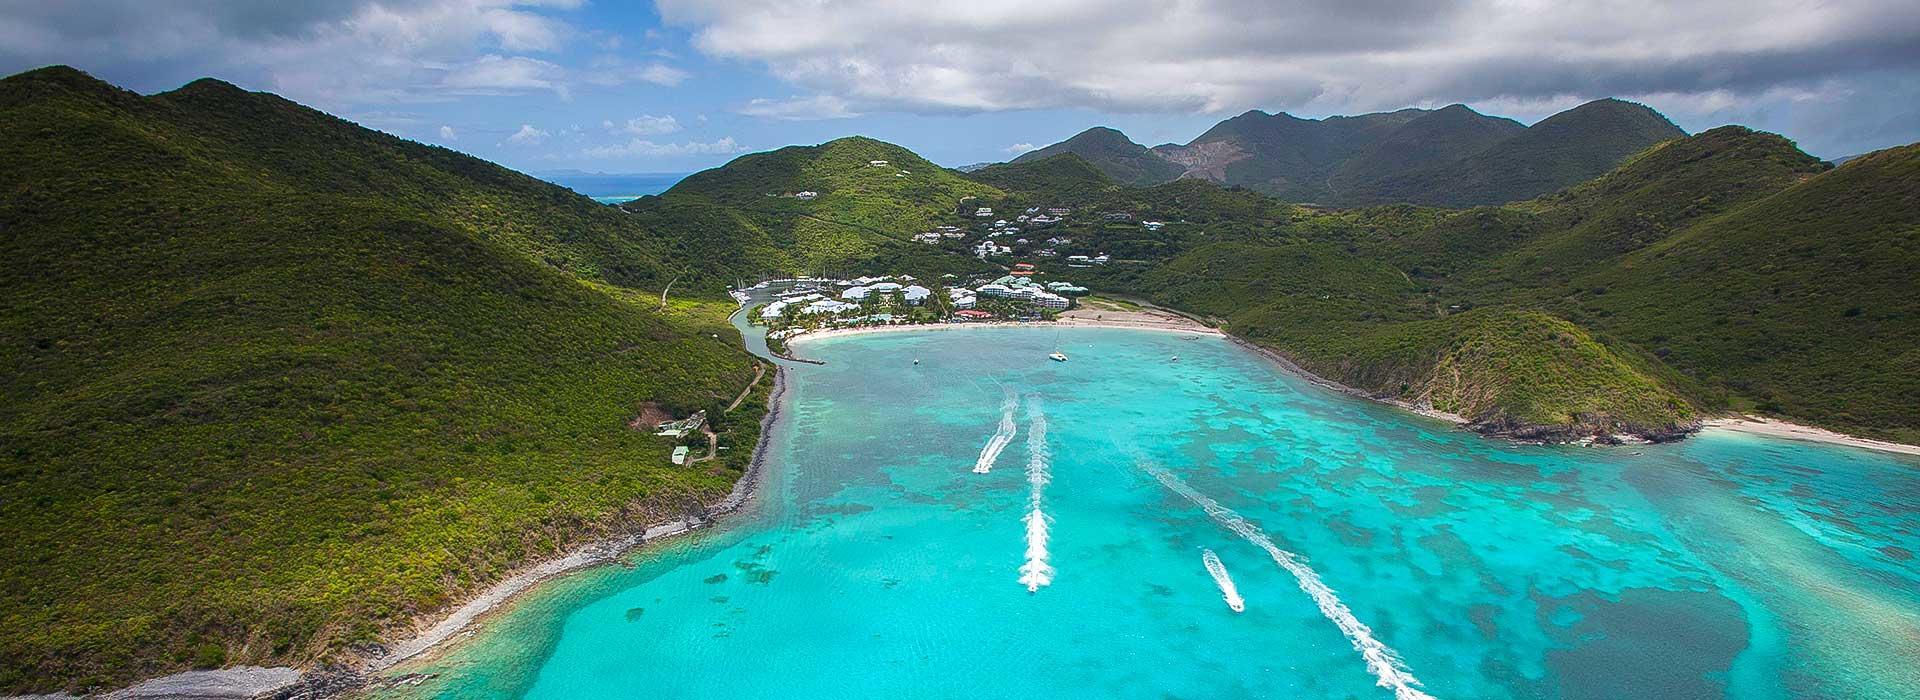 The beautiful island of St. Kitts and the Caribbean